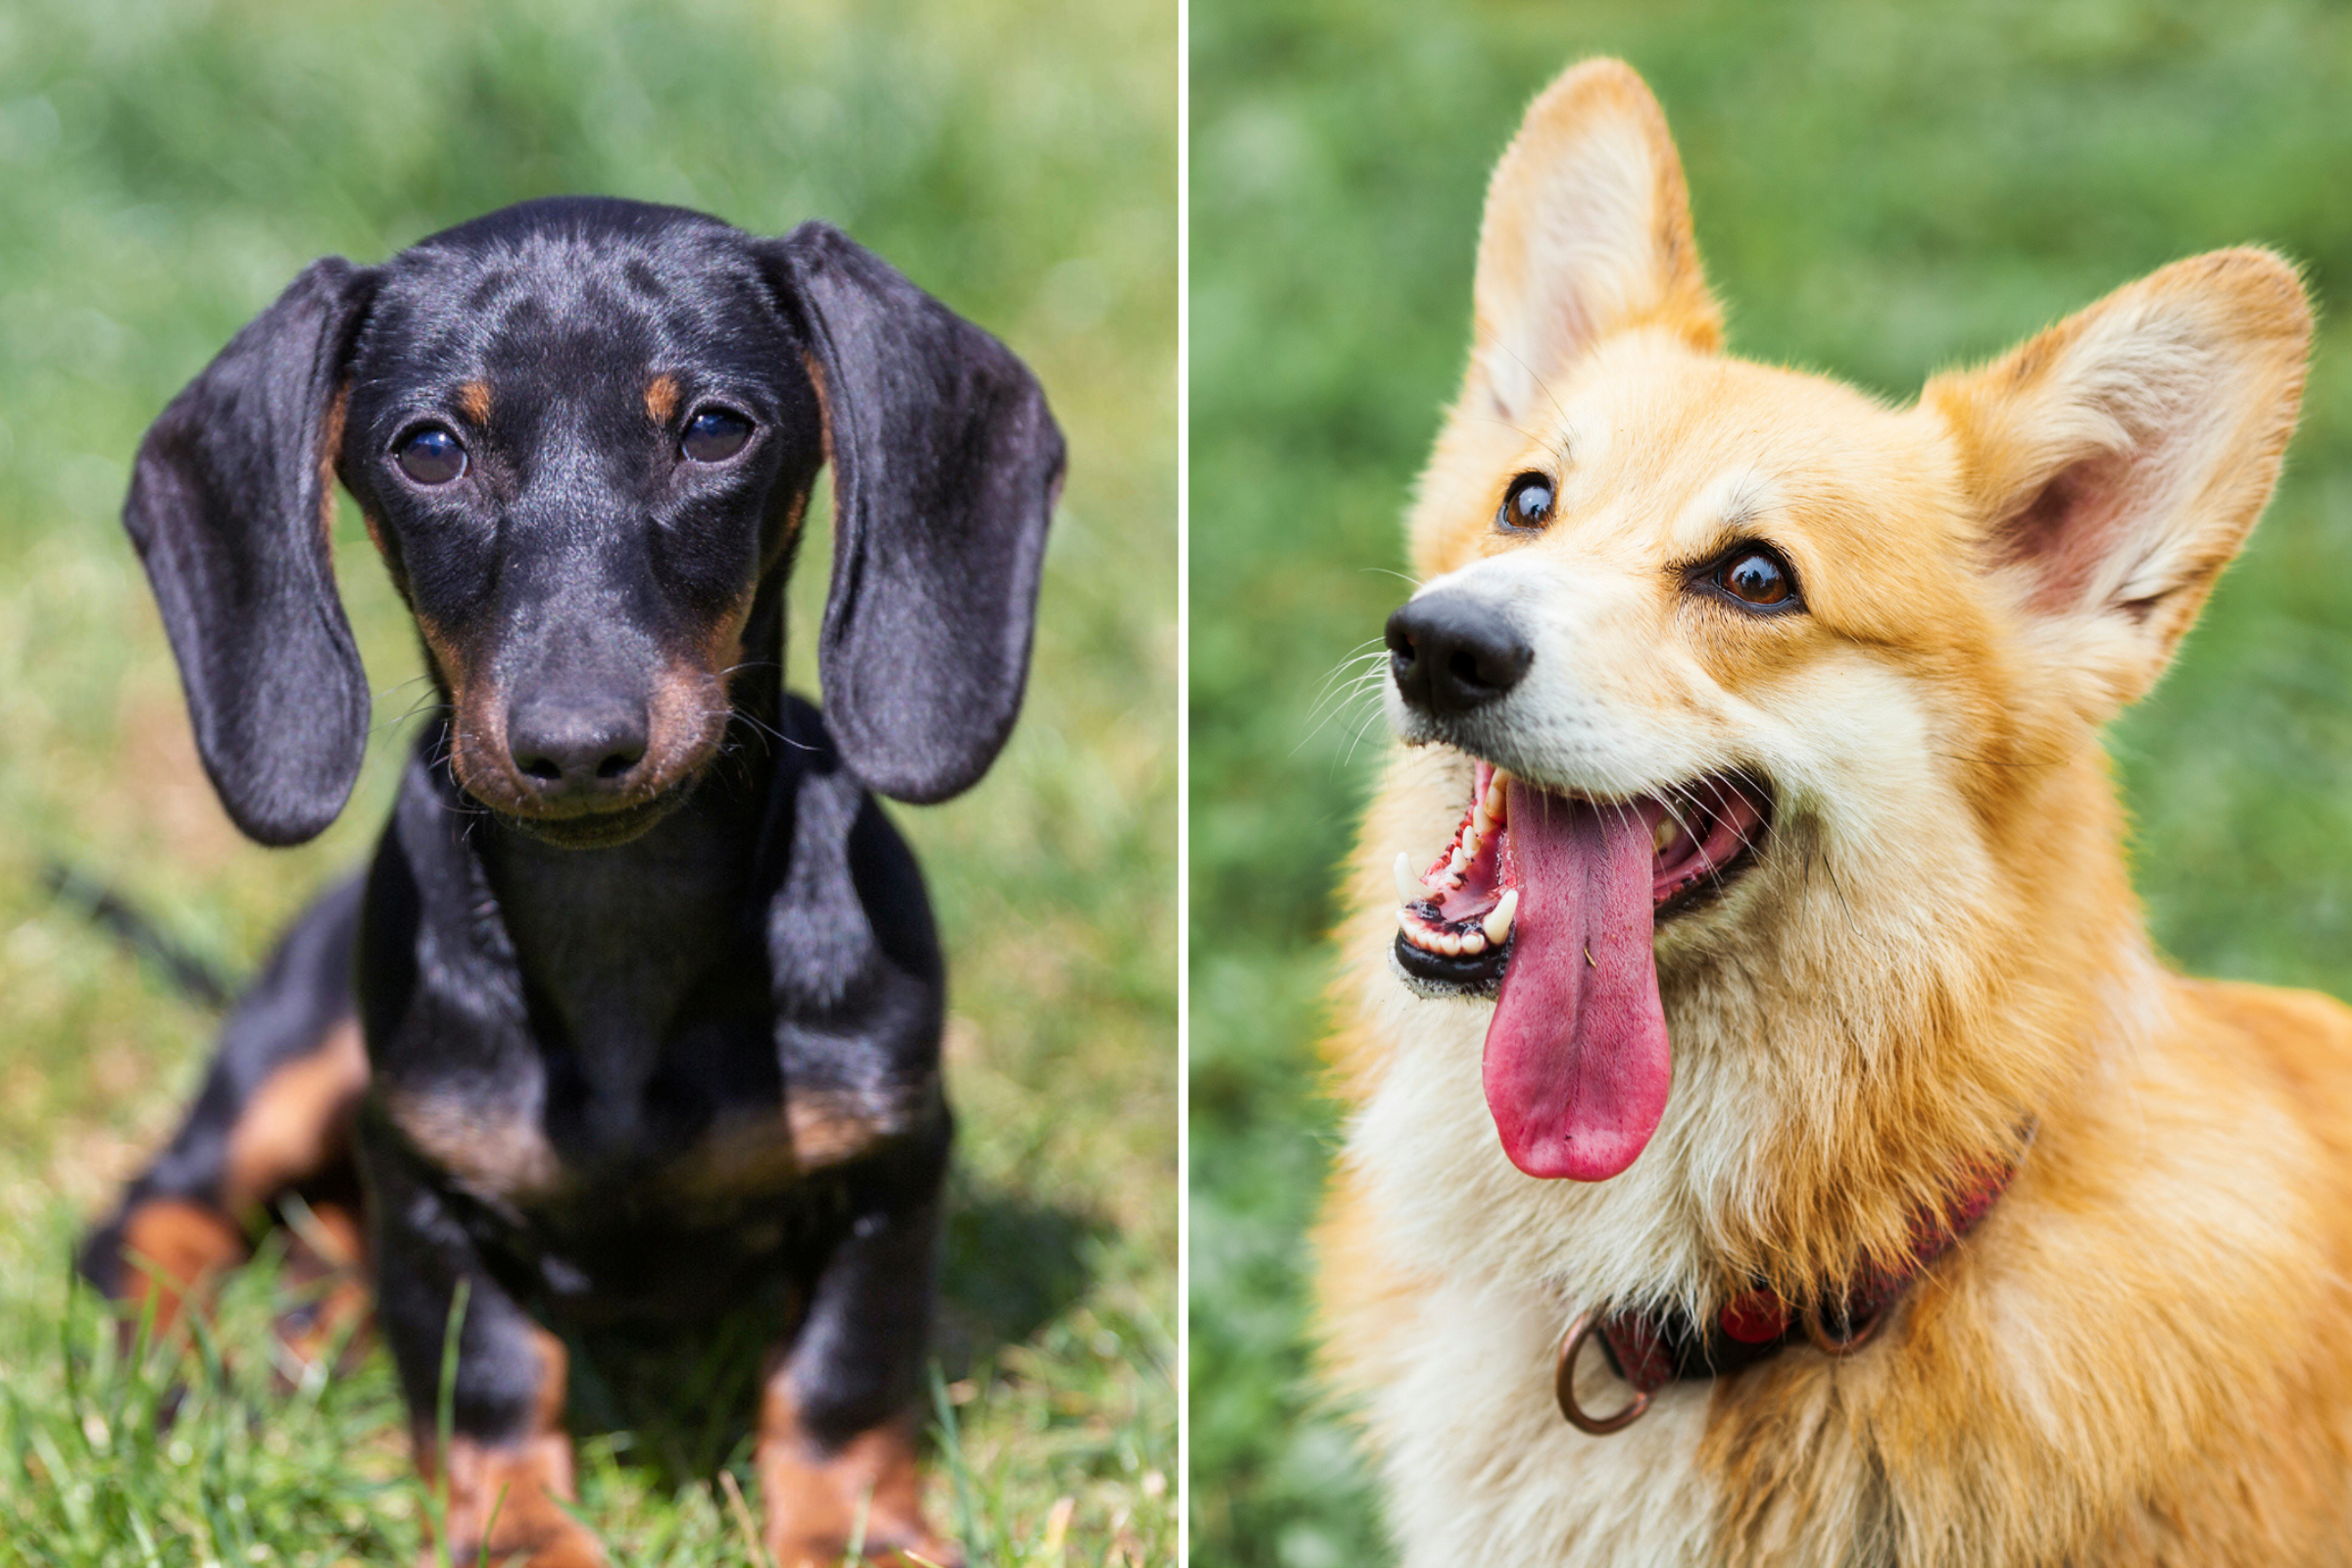 People Obsessed With Dachshund x Corgi Mix: 'What a Beautiful